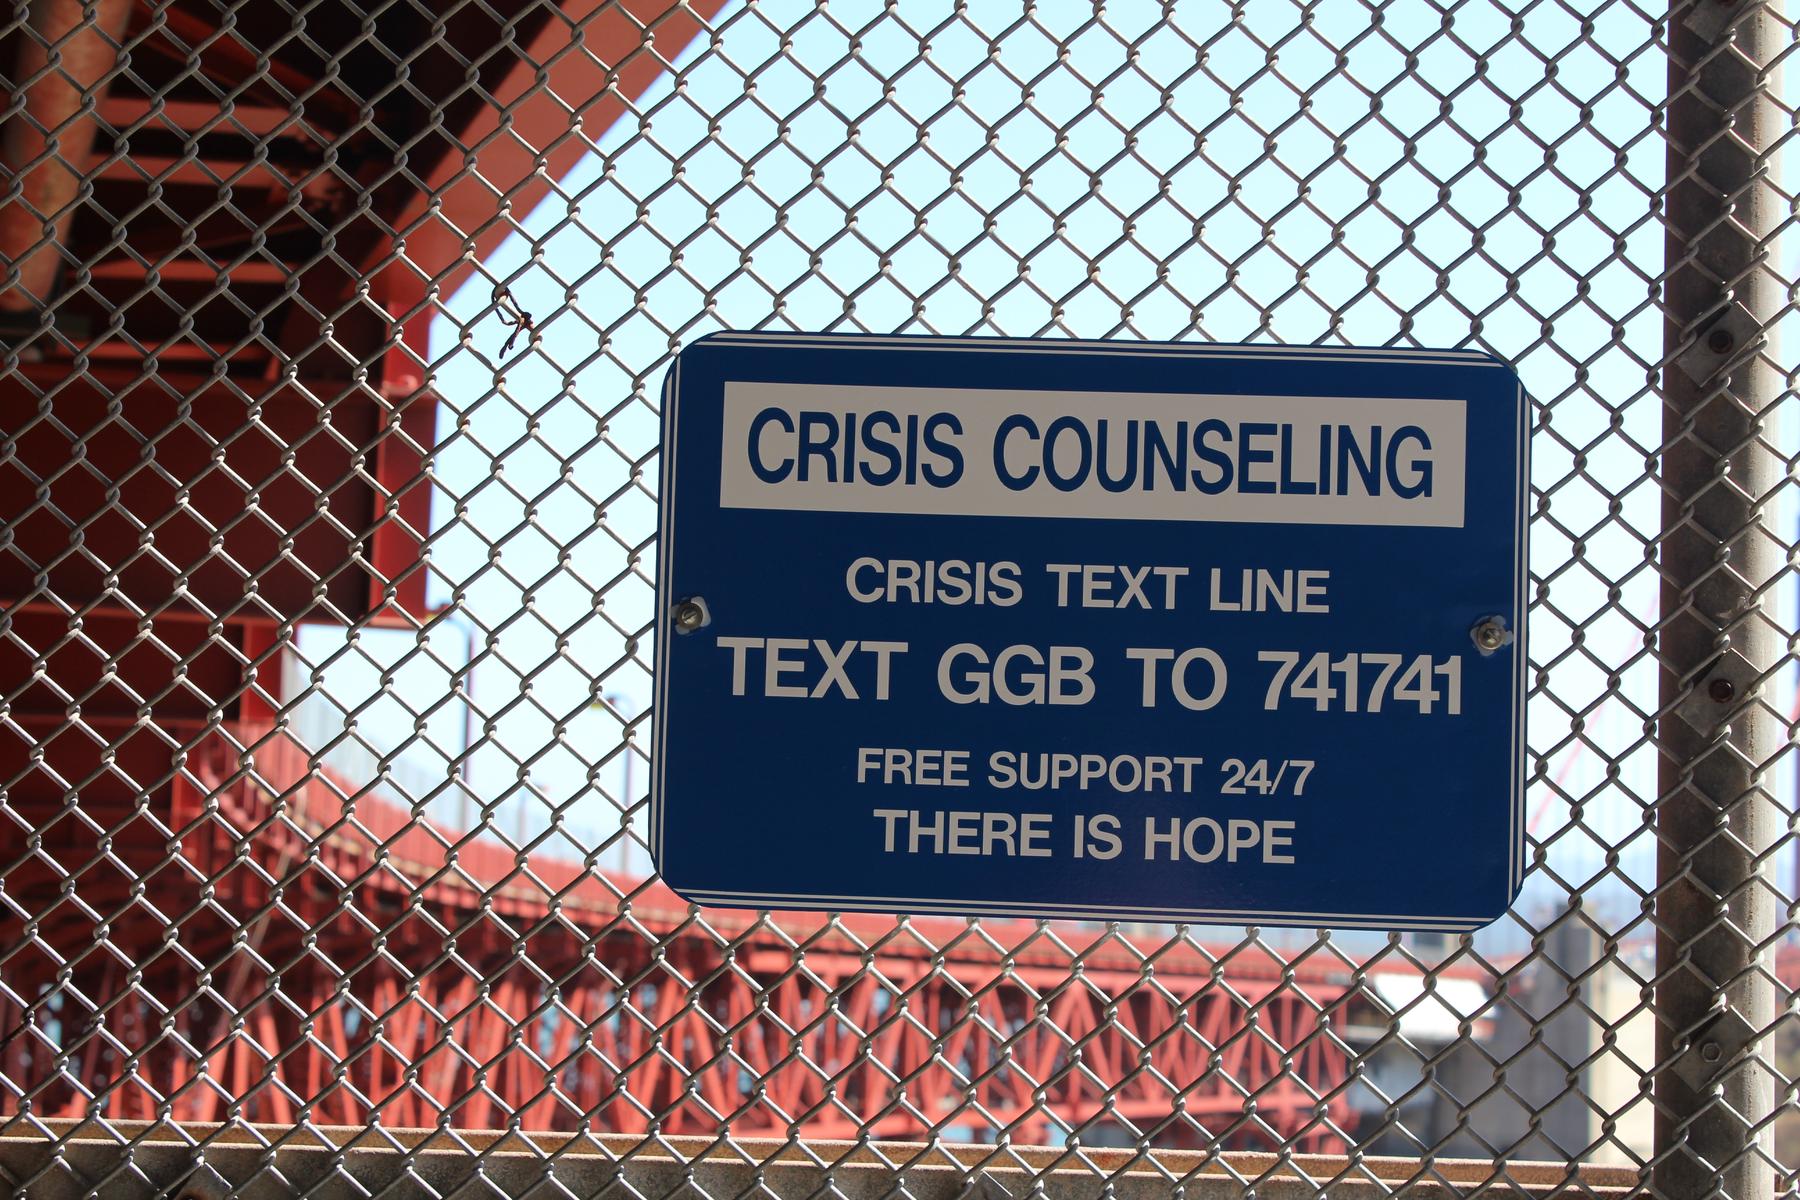 File:Crisis Counseling at Golden Gate Bridge.jpg - a sign on a fence